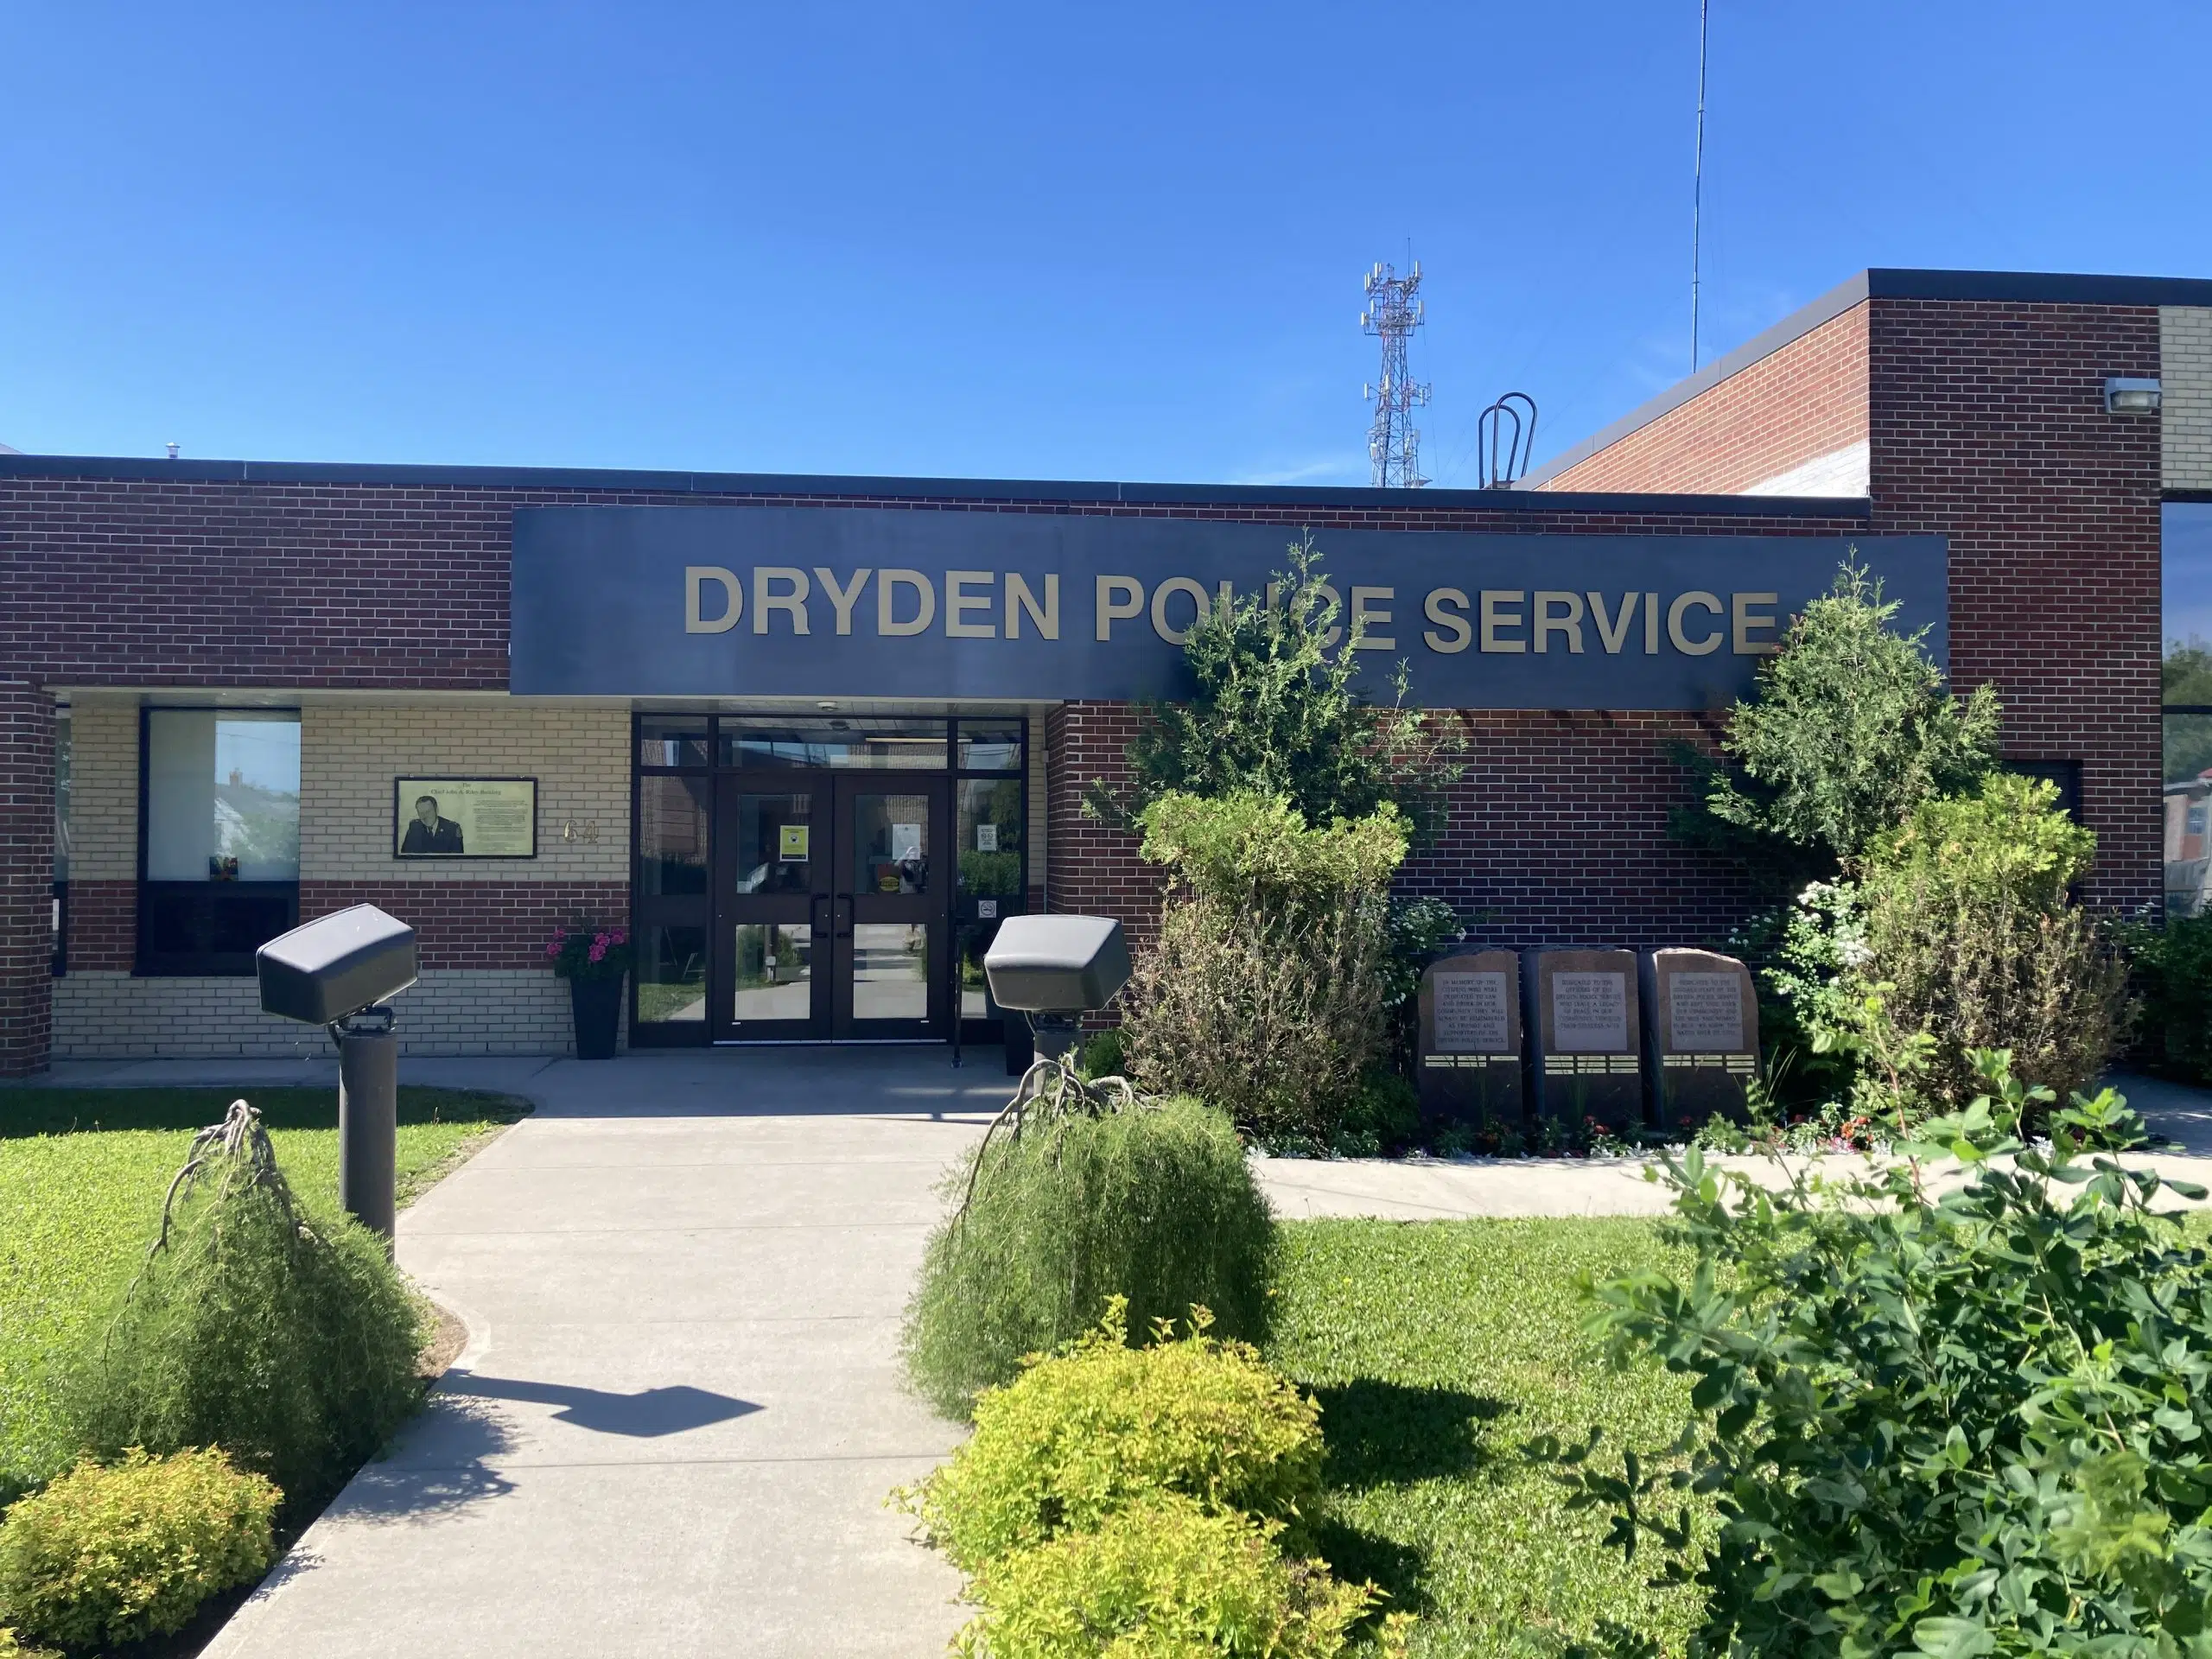 Busy Week For Dryden Police Service